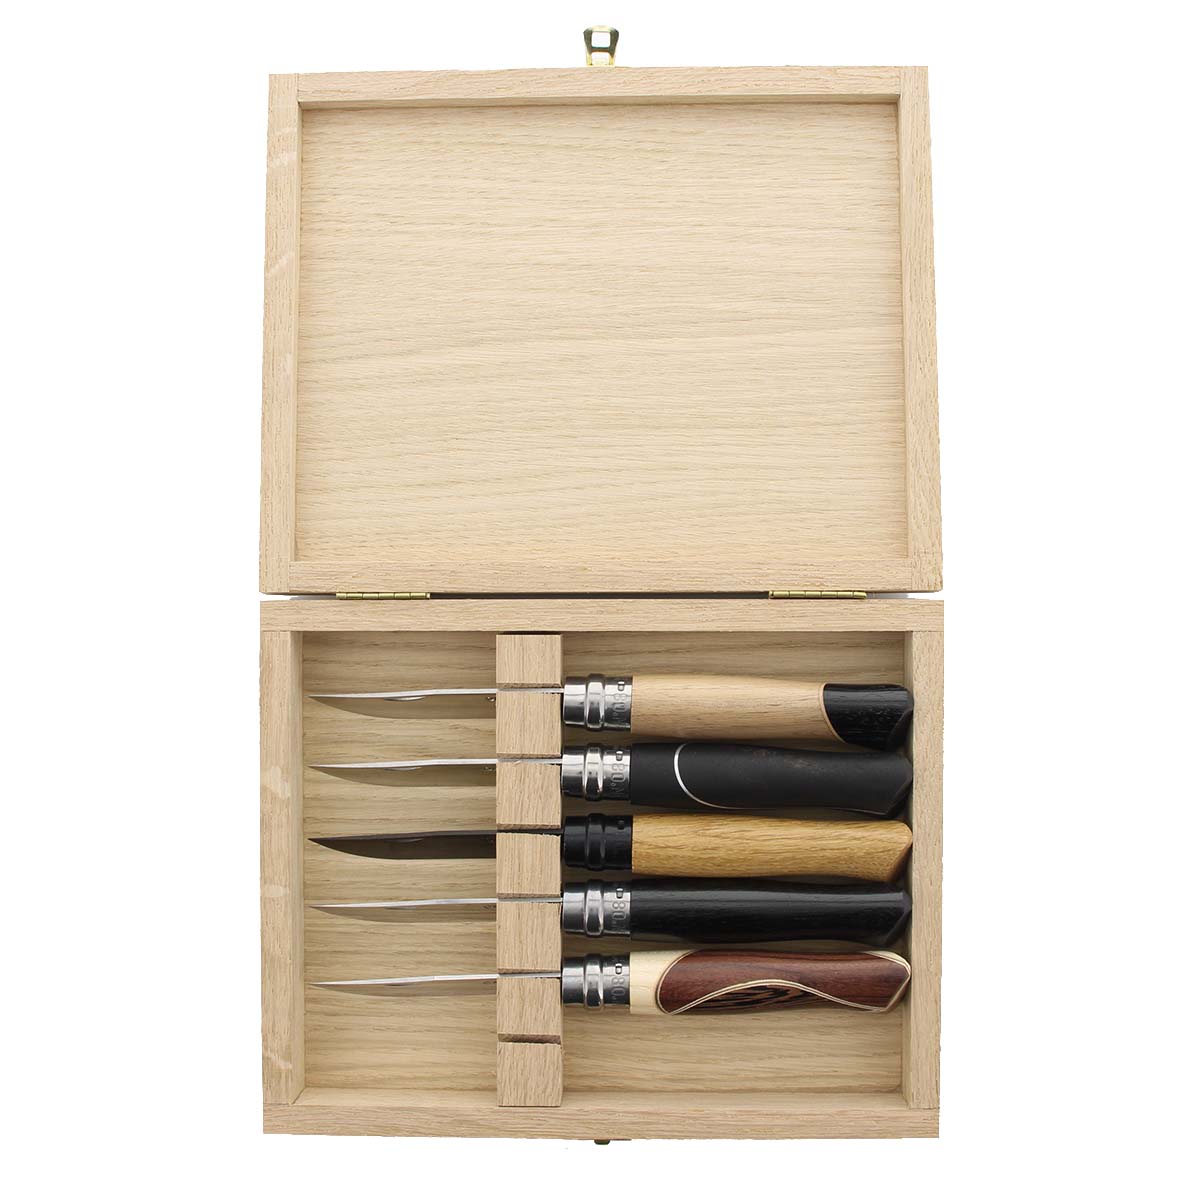 No.08 Master Collector Box Set + your Opinel-OPINEL USA